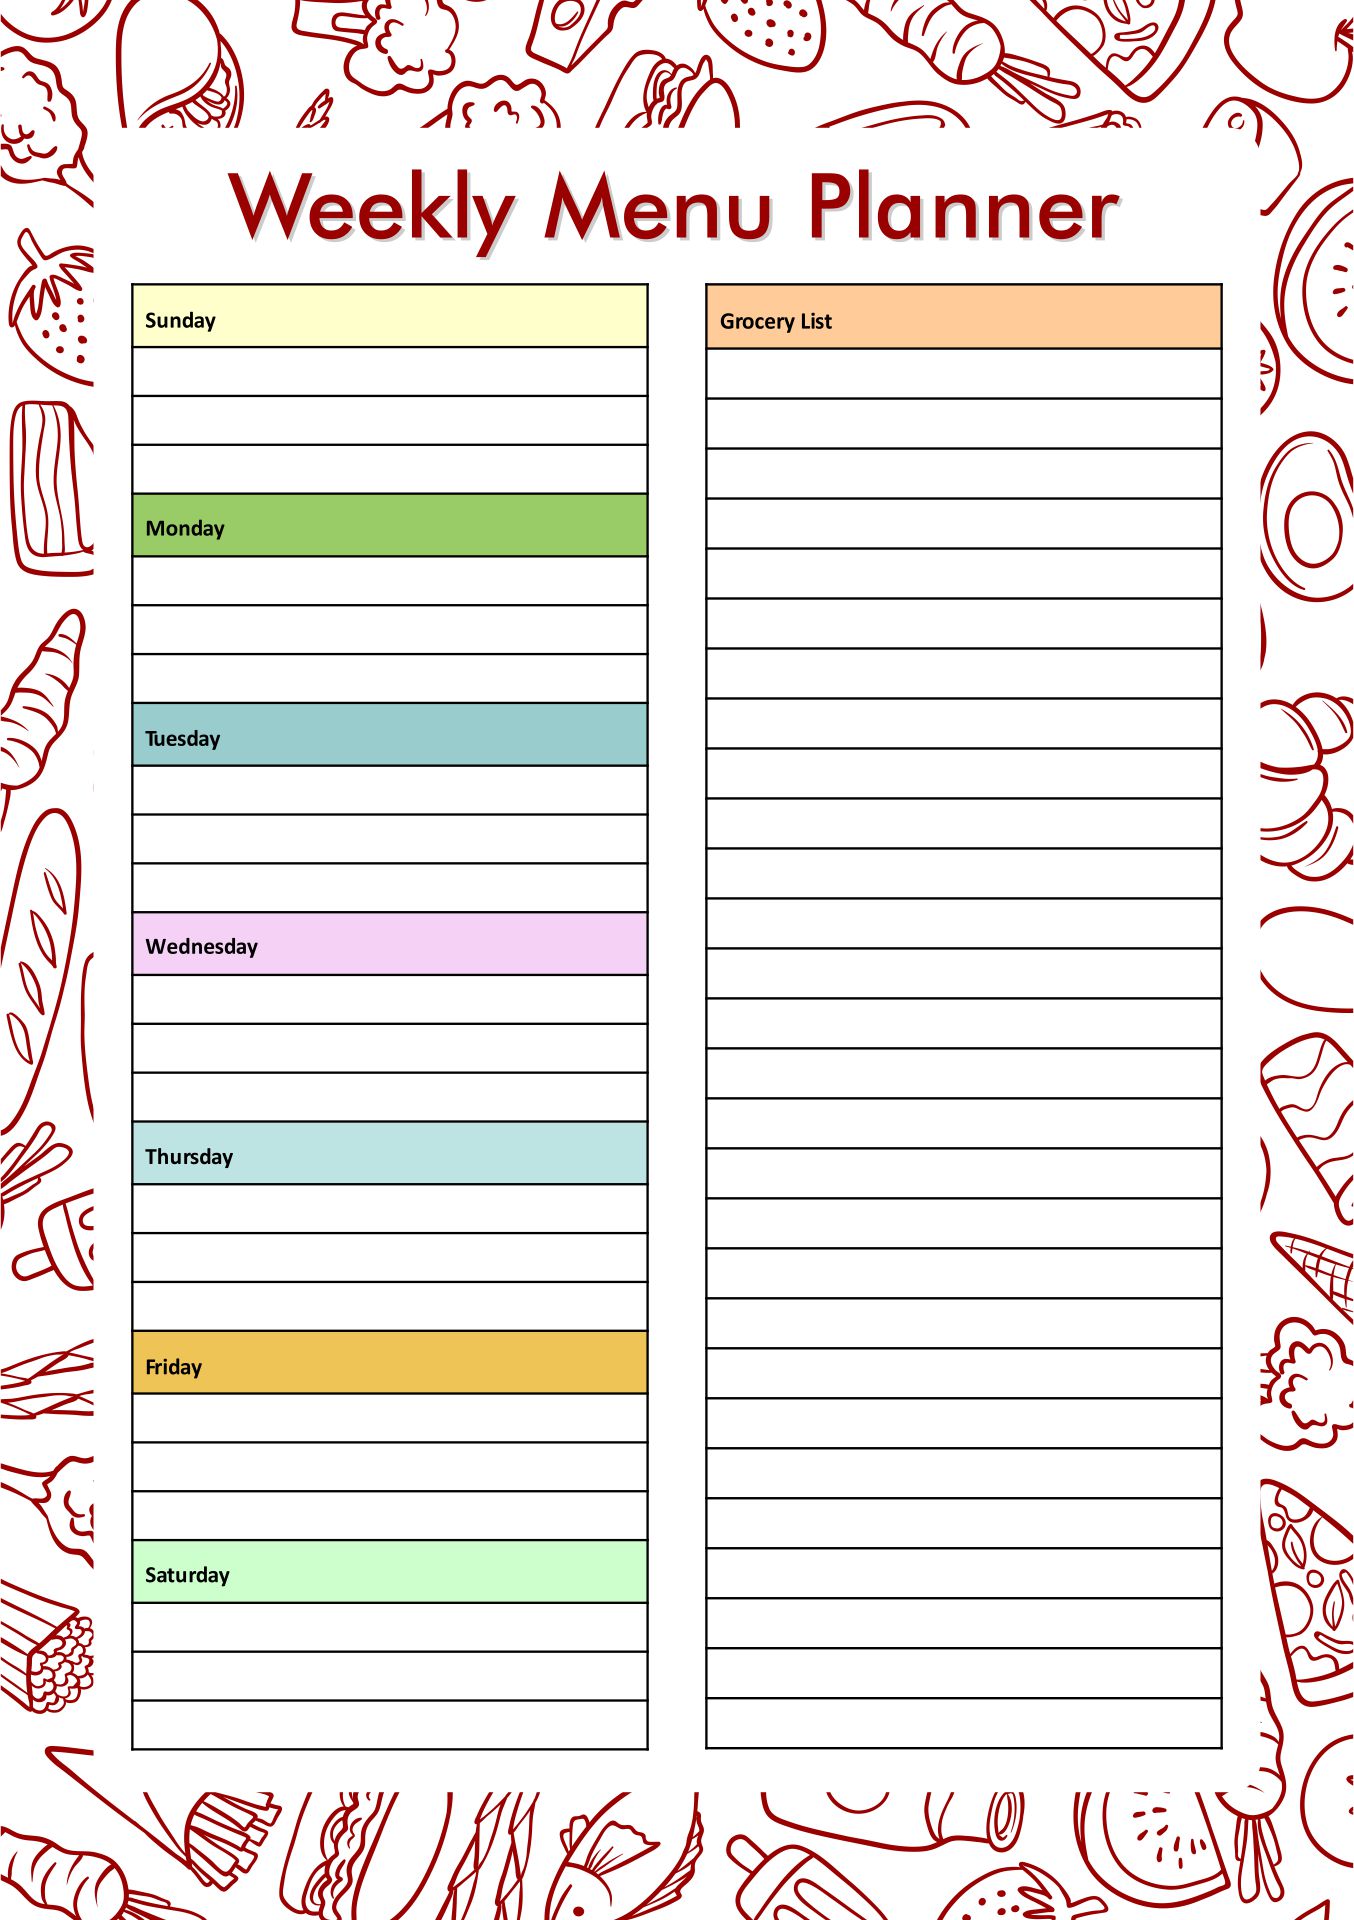 6 Best Images of Free Printable Meal Planner Calorie Charts - Low Carb